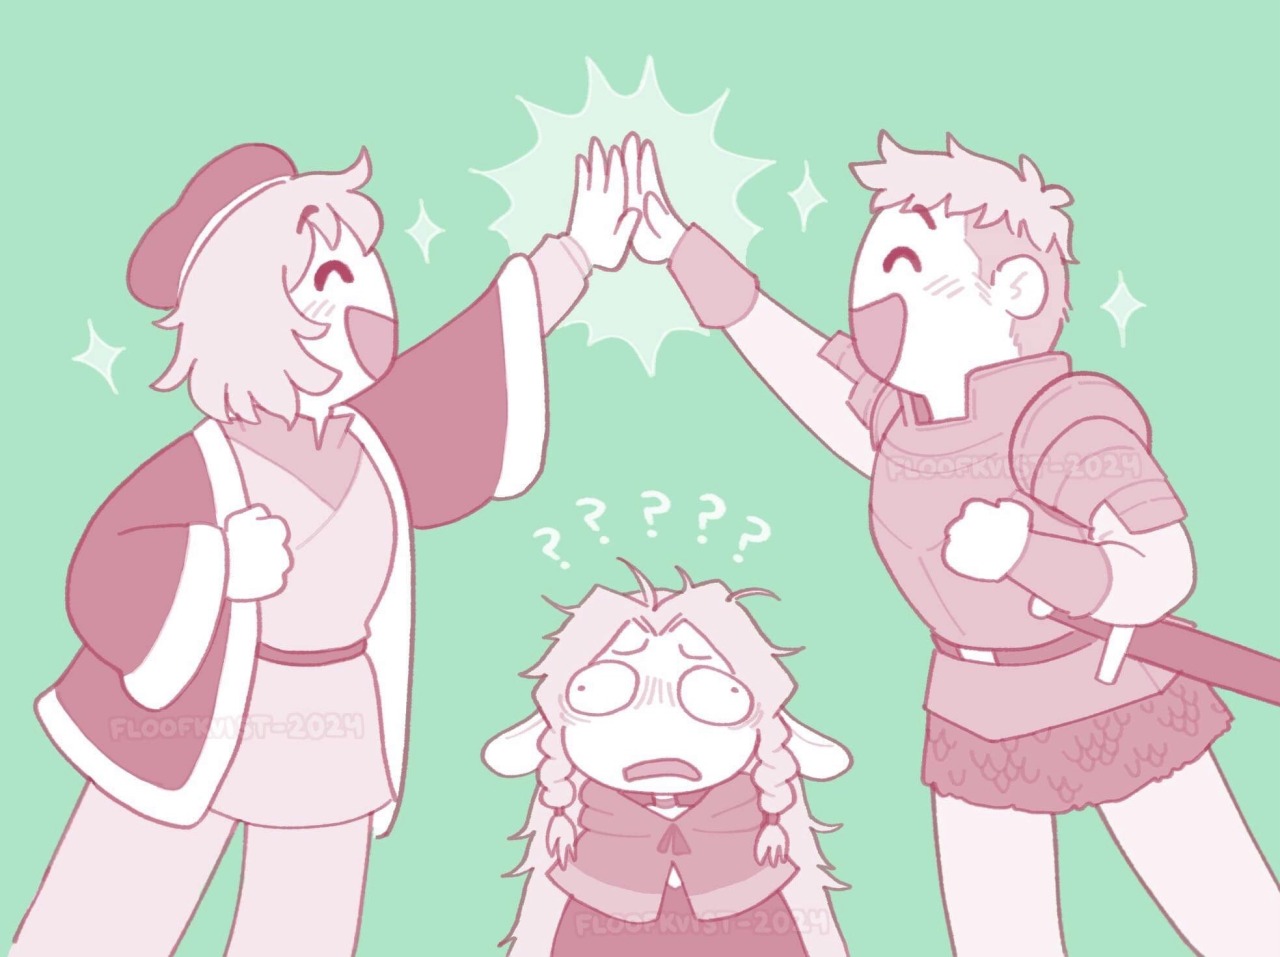 the siblings high-five over marcille, who has become cross-eyed in confusion, several question marks appearing over her head